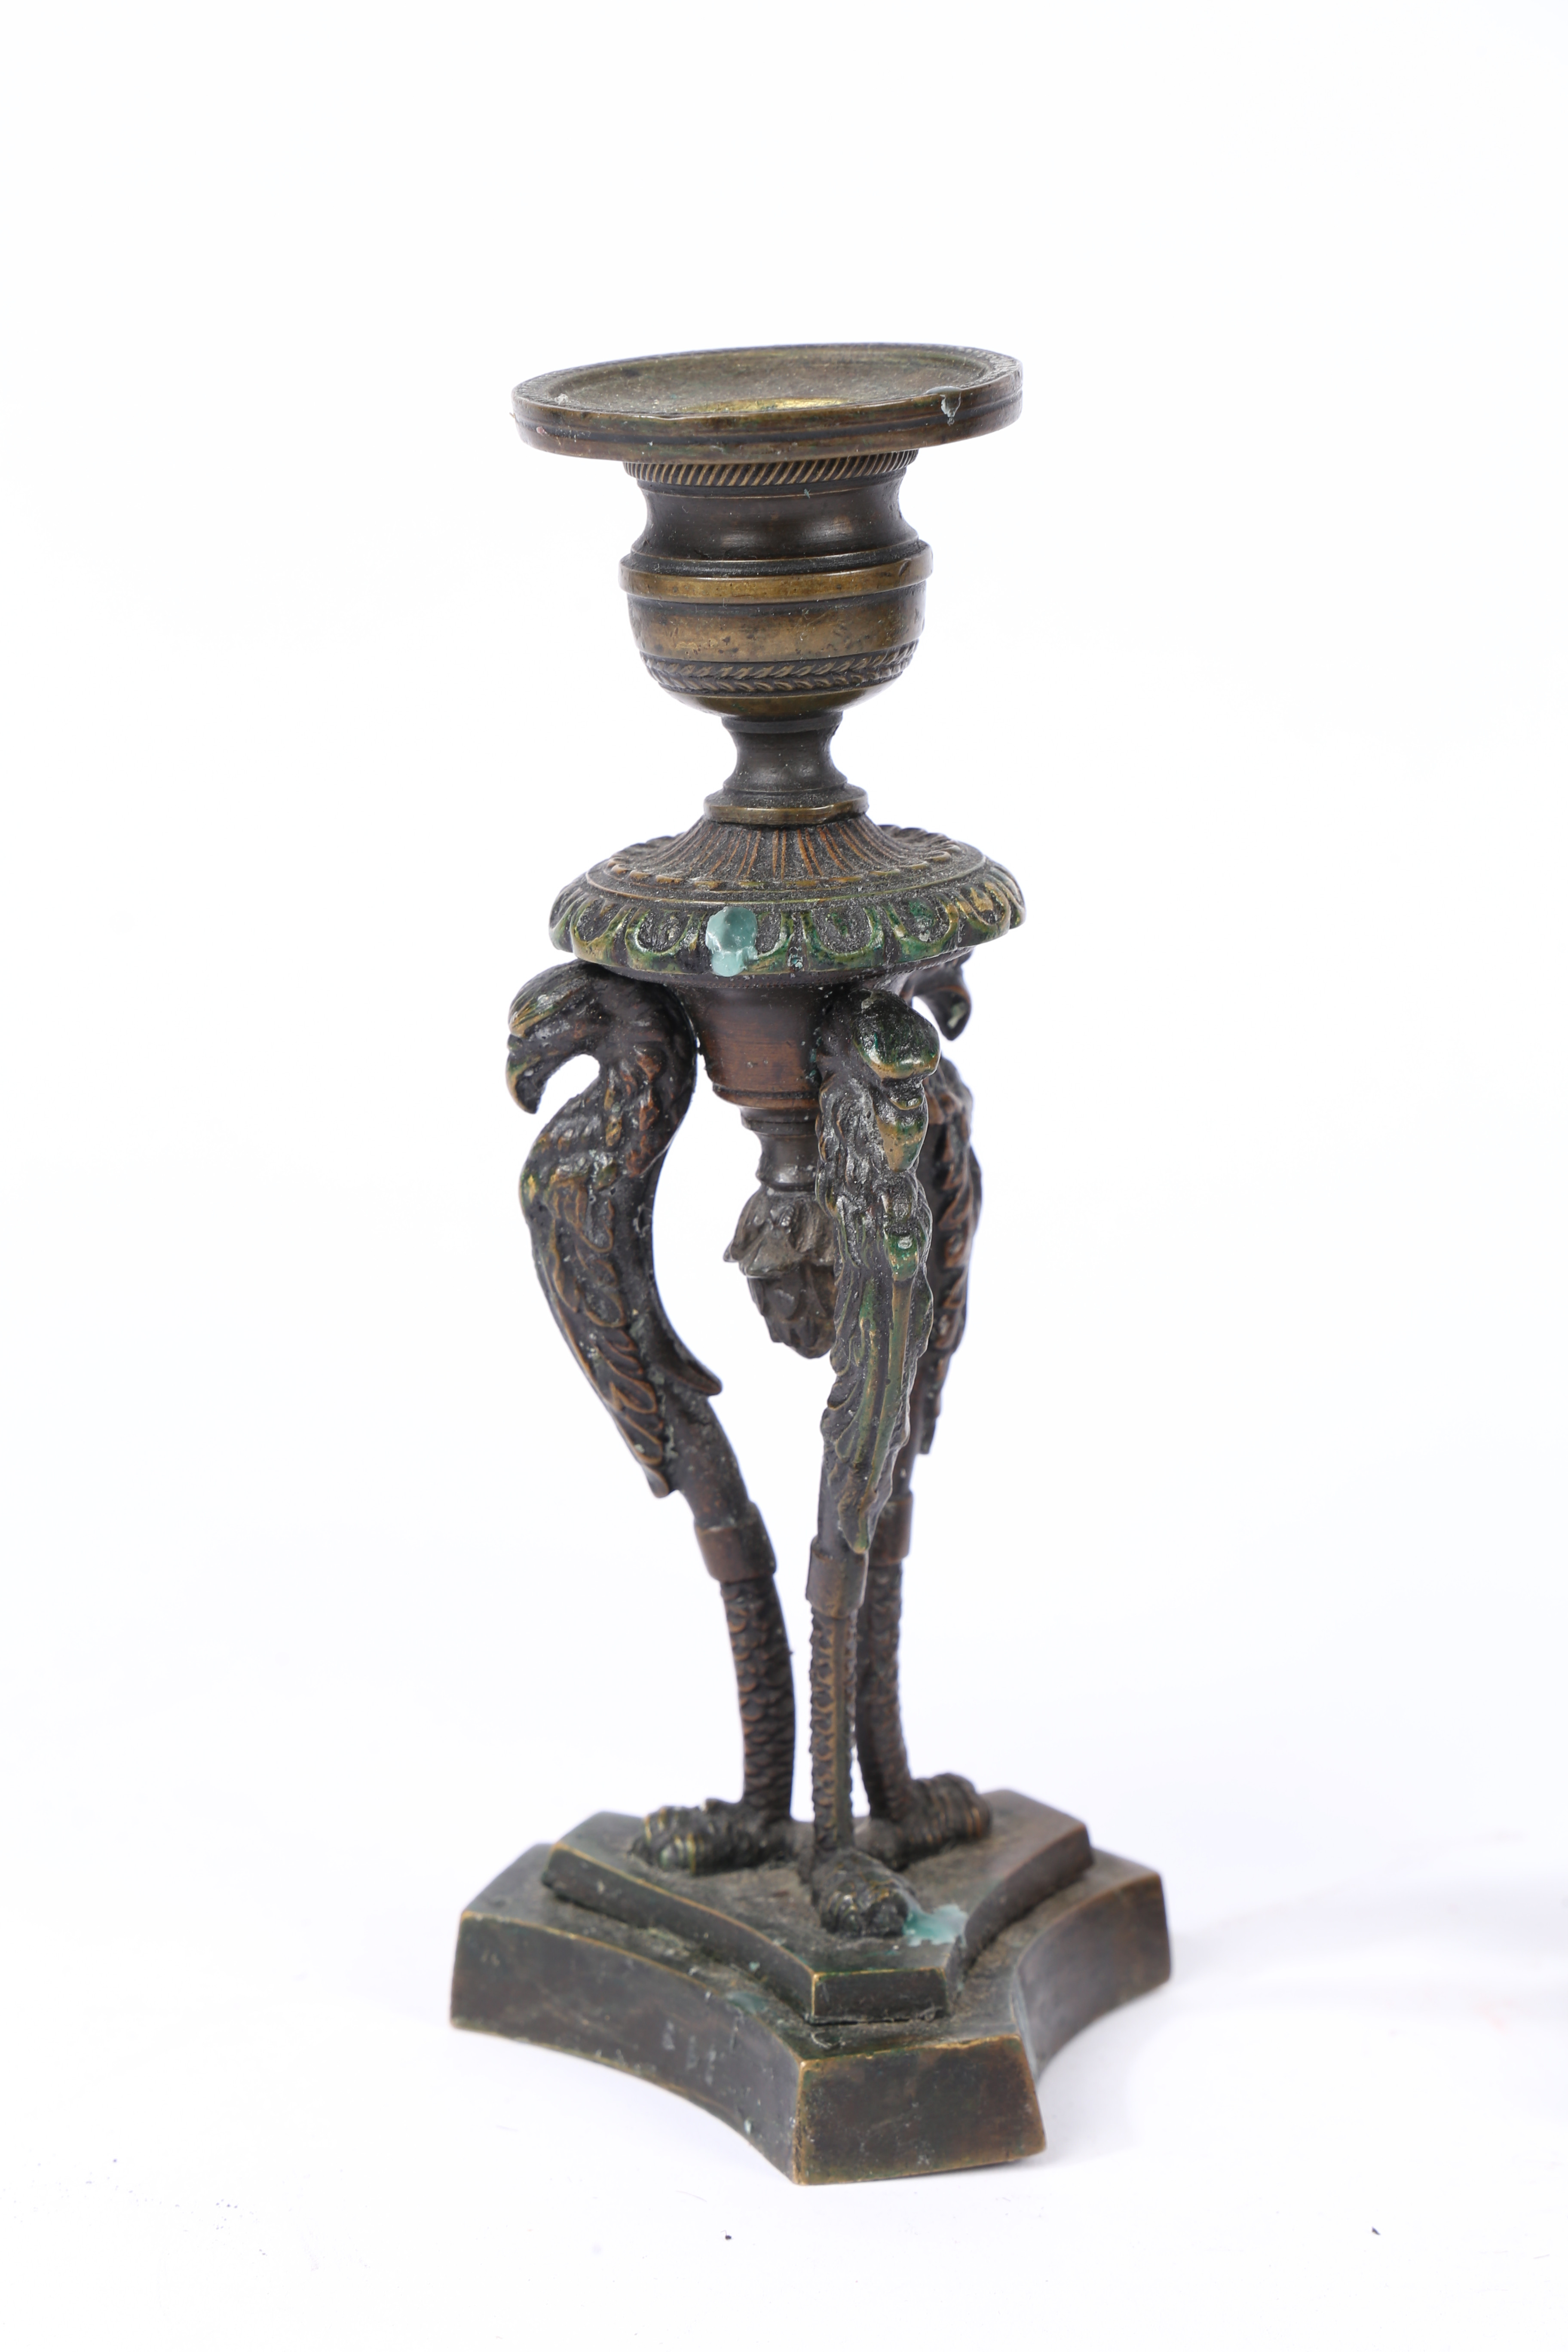 IN THE MANNER OF CHENEY OF LONDON A PAIR OF REGENCY BRONZE CANDLESTICKS. - Image 4 of 6